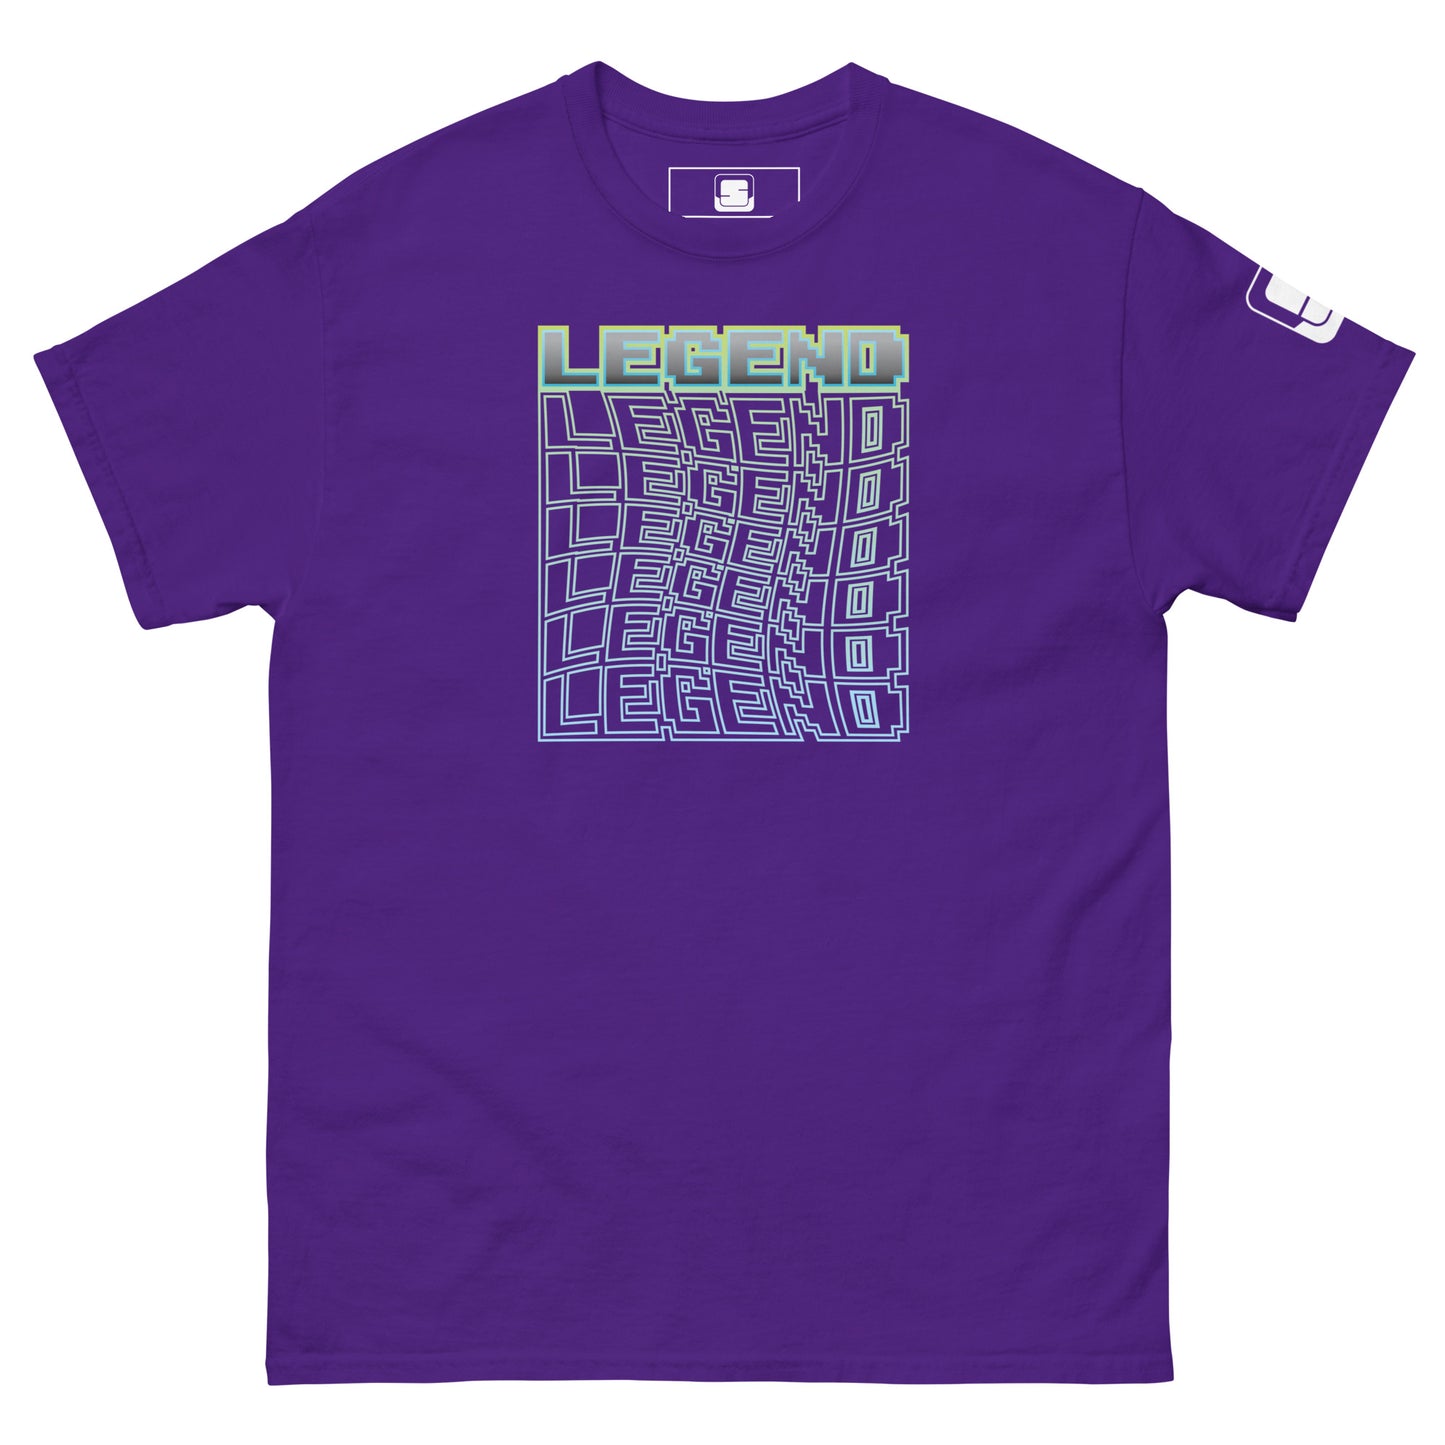 purple t-shirt laid flat, showcasing a green-to-blue gradient 'LEGEND' text in a 3D cube illusion design, with a logo tag on the sleeve, against a clean white background.